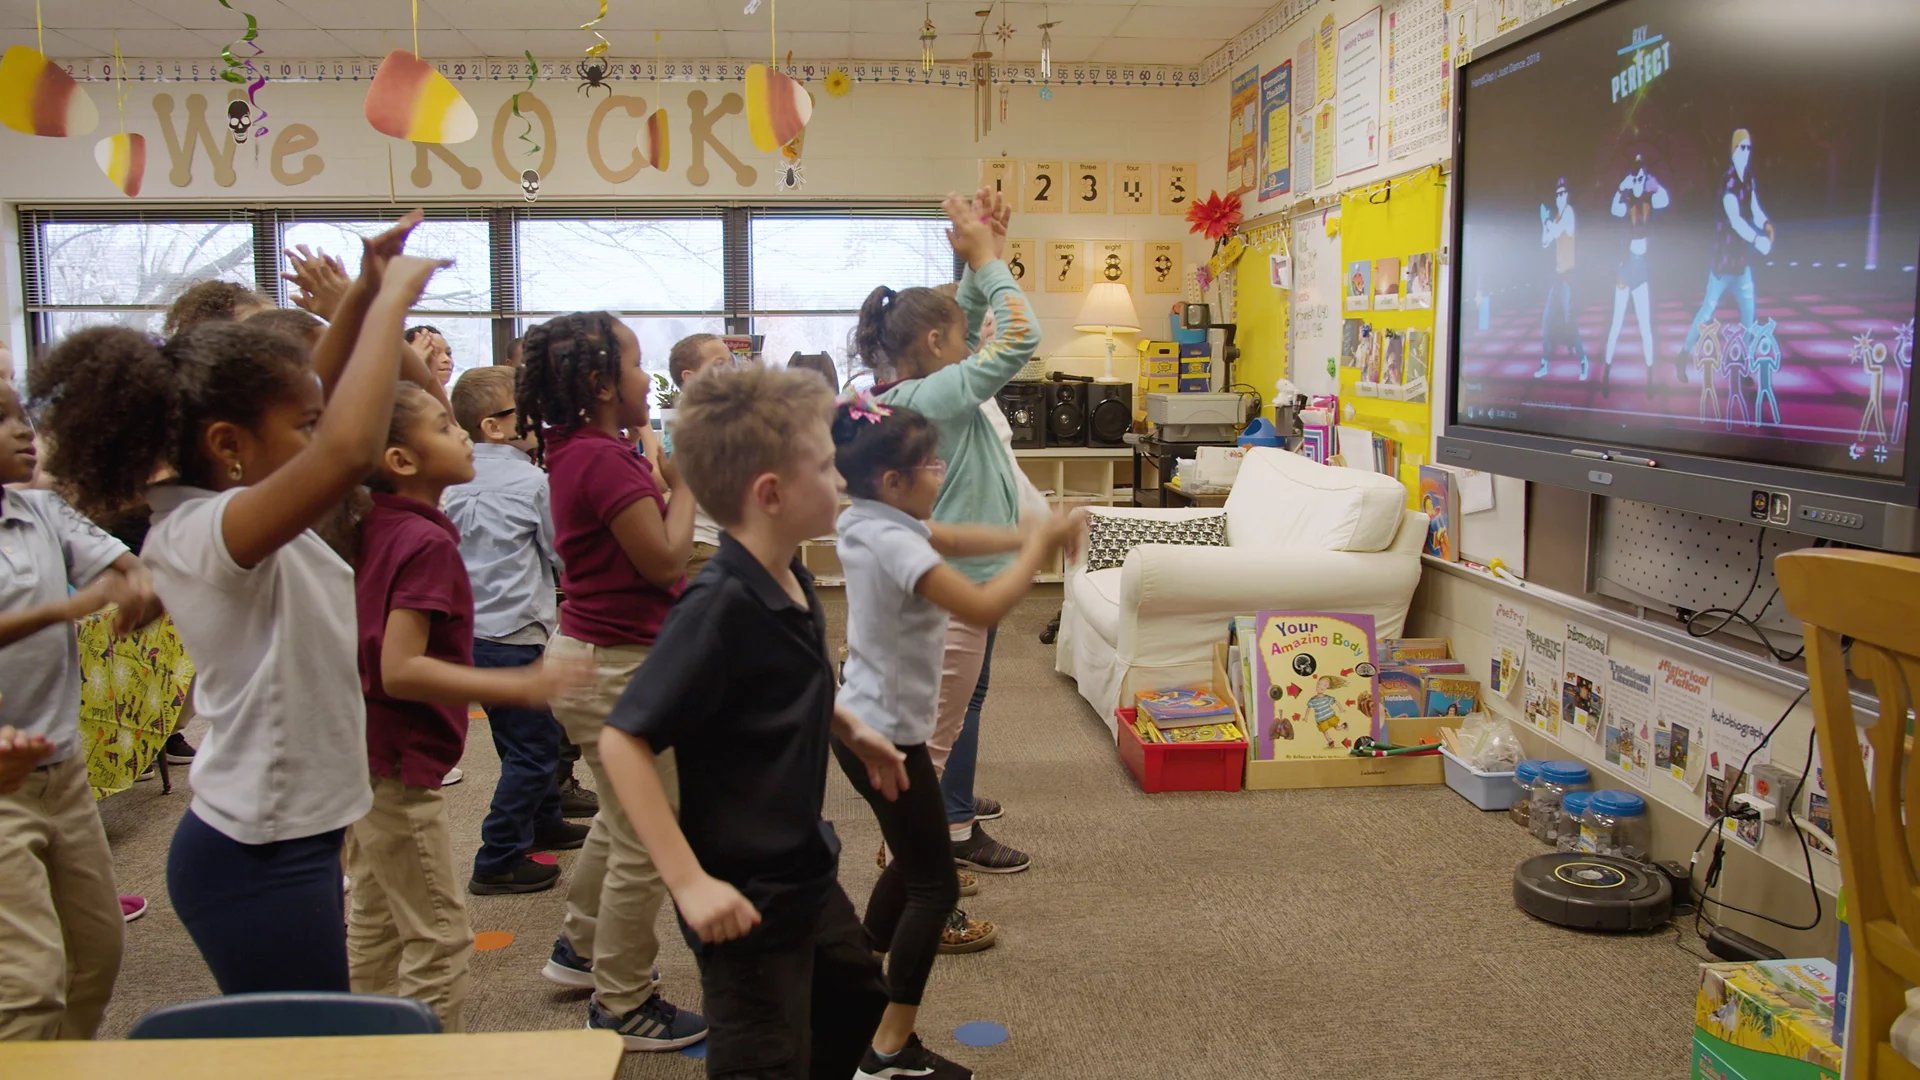 alt="Students of Kankakee Elementary School dancing along a video played on BenQ Interactive Display"